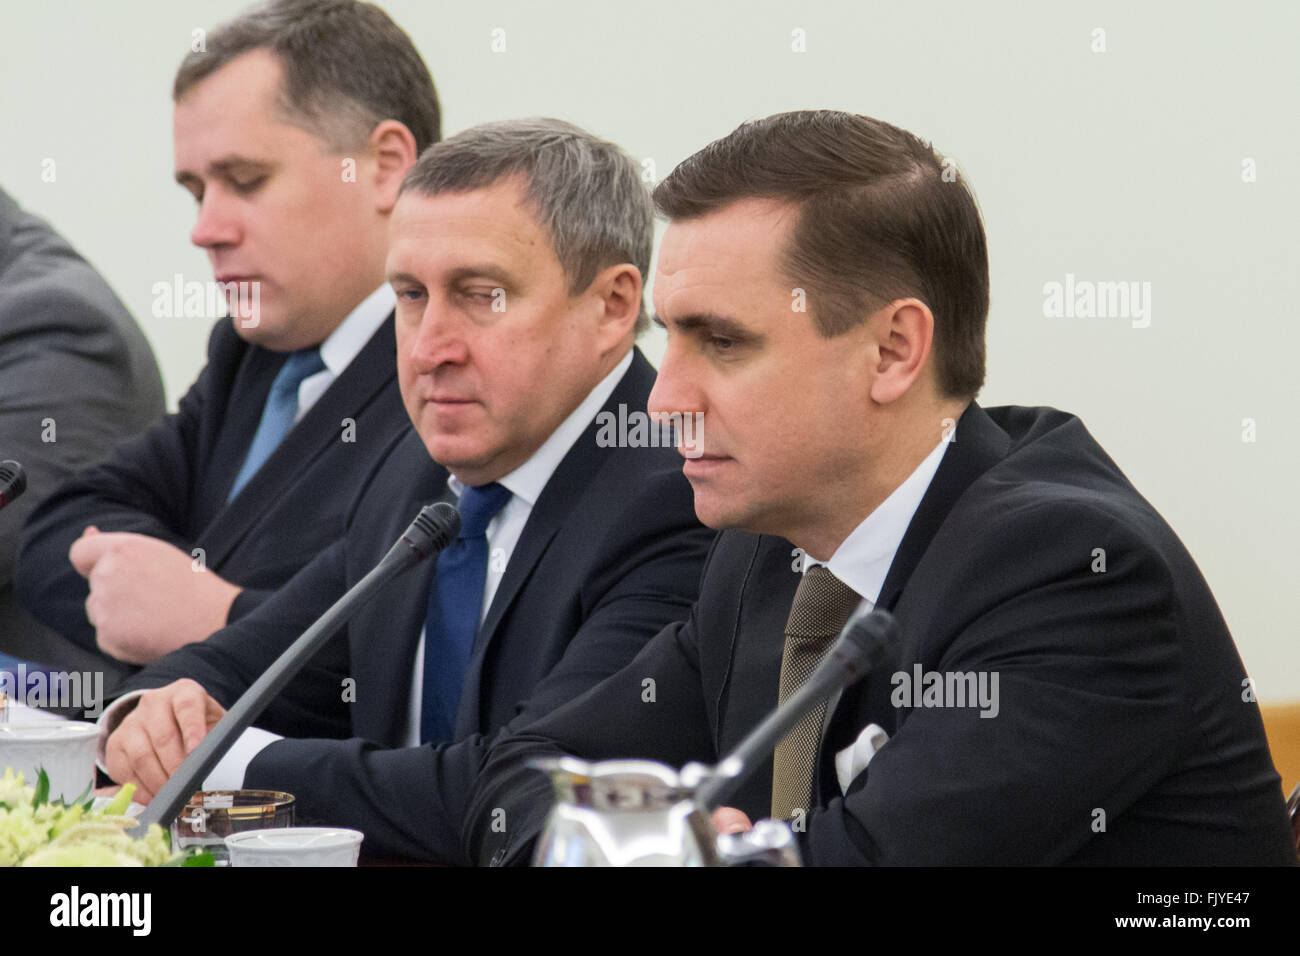 Warsaw, Poland. 04th Mar, 2016. Deputy of Head of Presidential Administration of Ukraine, Kostiantyn Yelisieiev during a meeting of the Consultative Committee of Poland and Ukraine. © Mateusz Wlodarczyk/Pacific Press/Alamy Live News Stock Photo